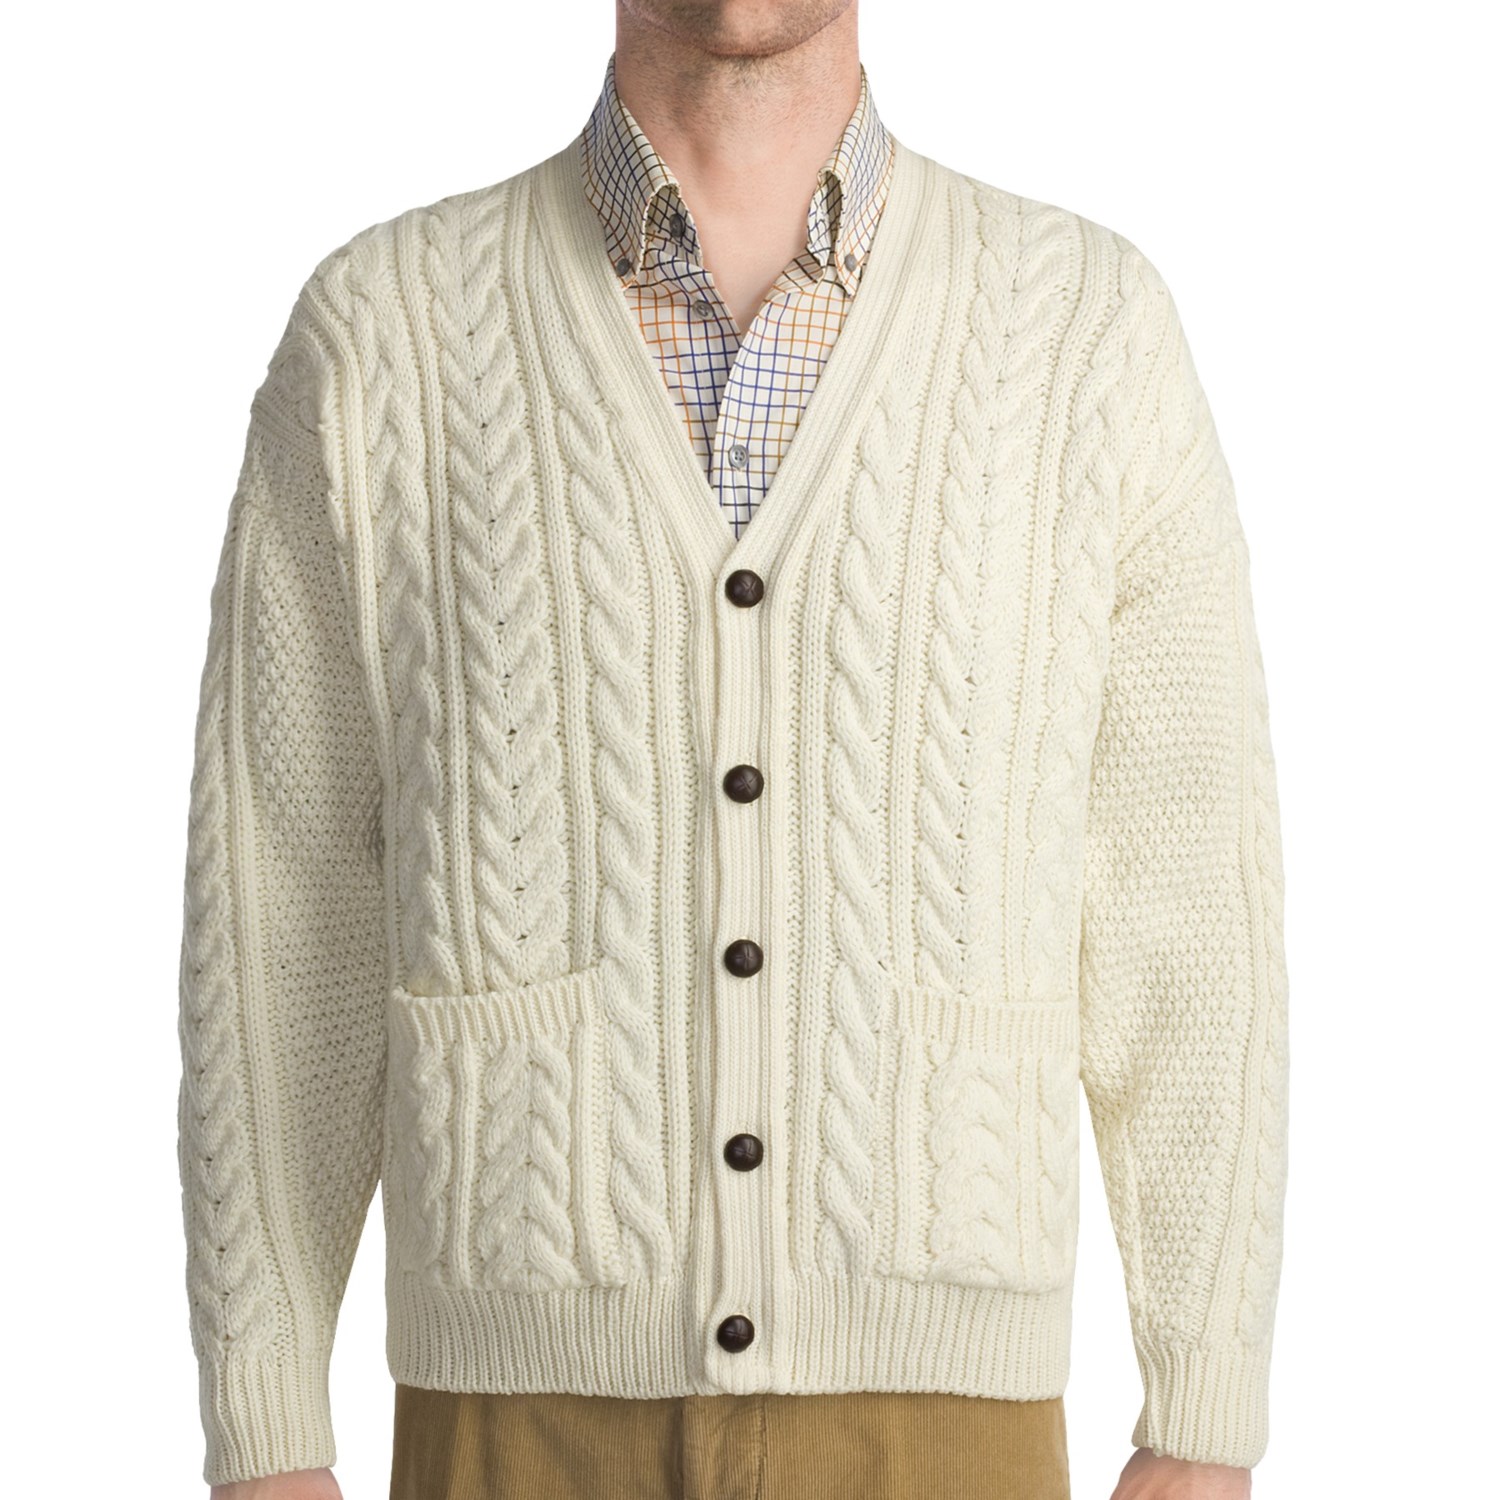 Peregrine by J.G. Glover Cardigan Sweater (For Men) 36521 78